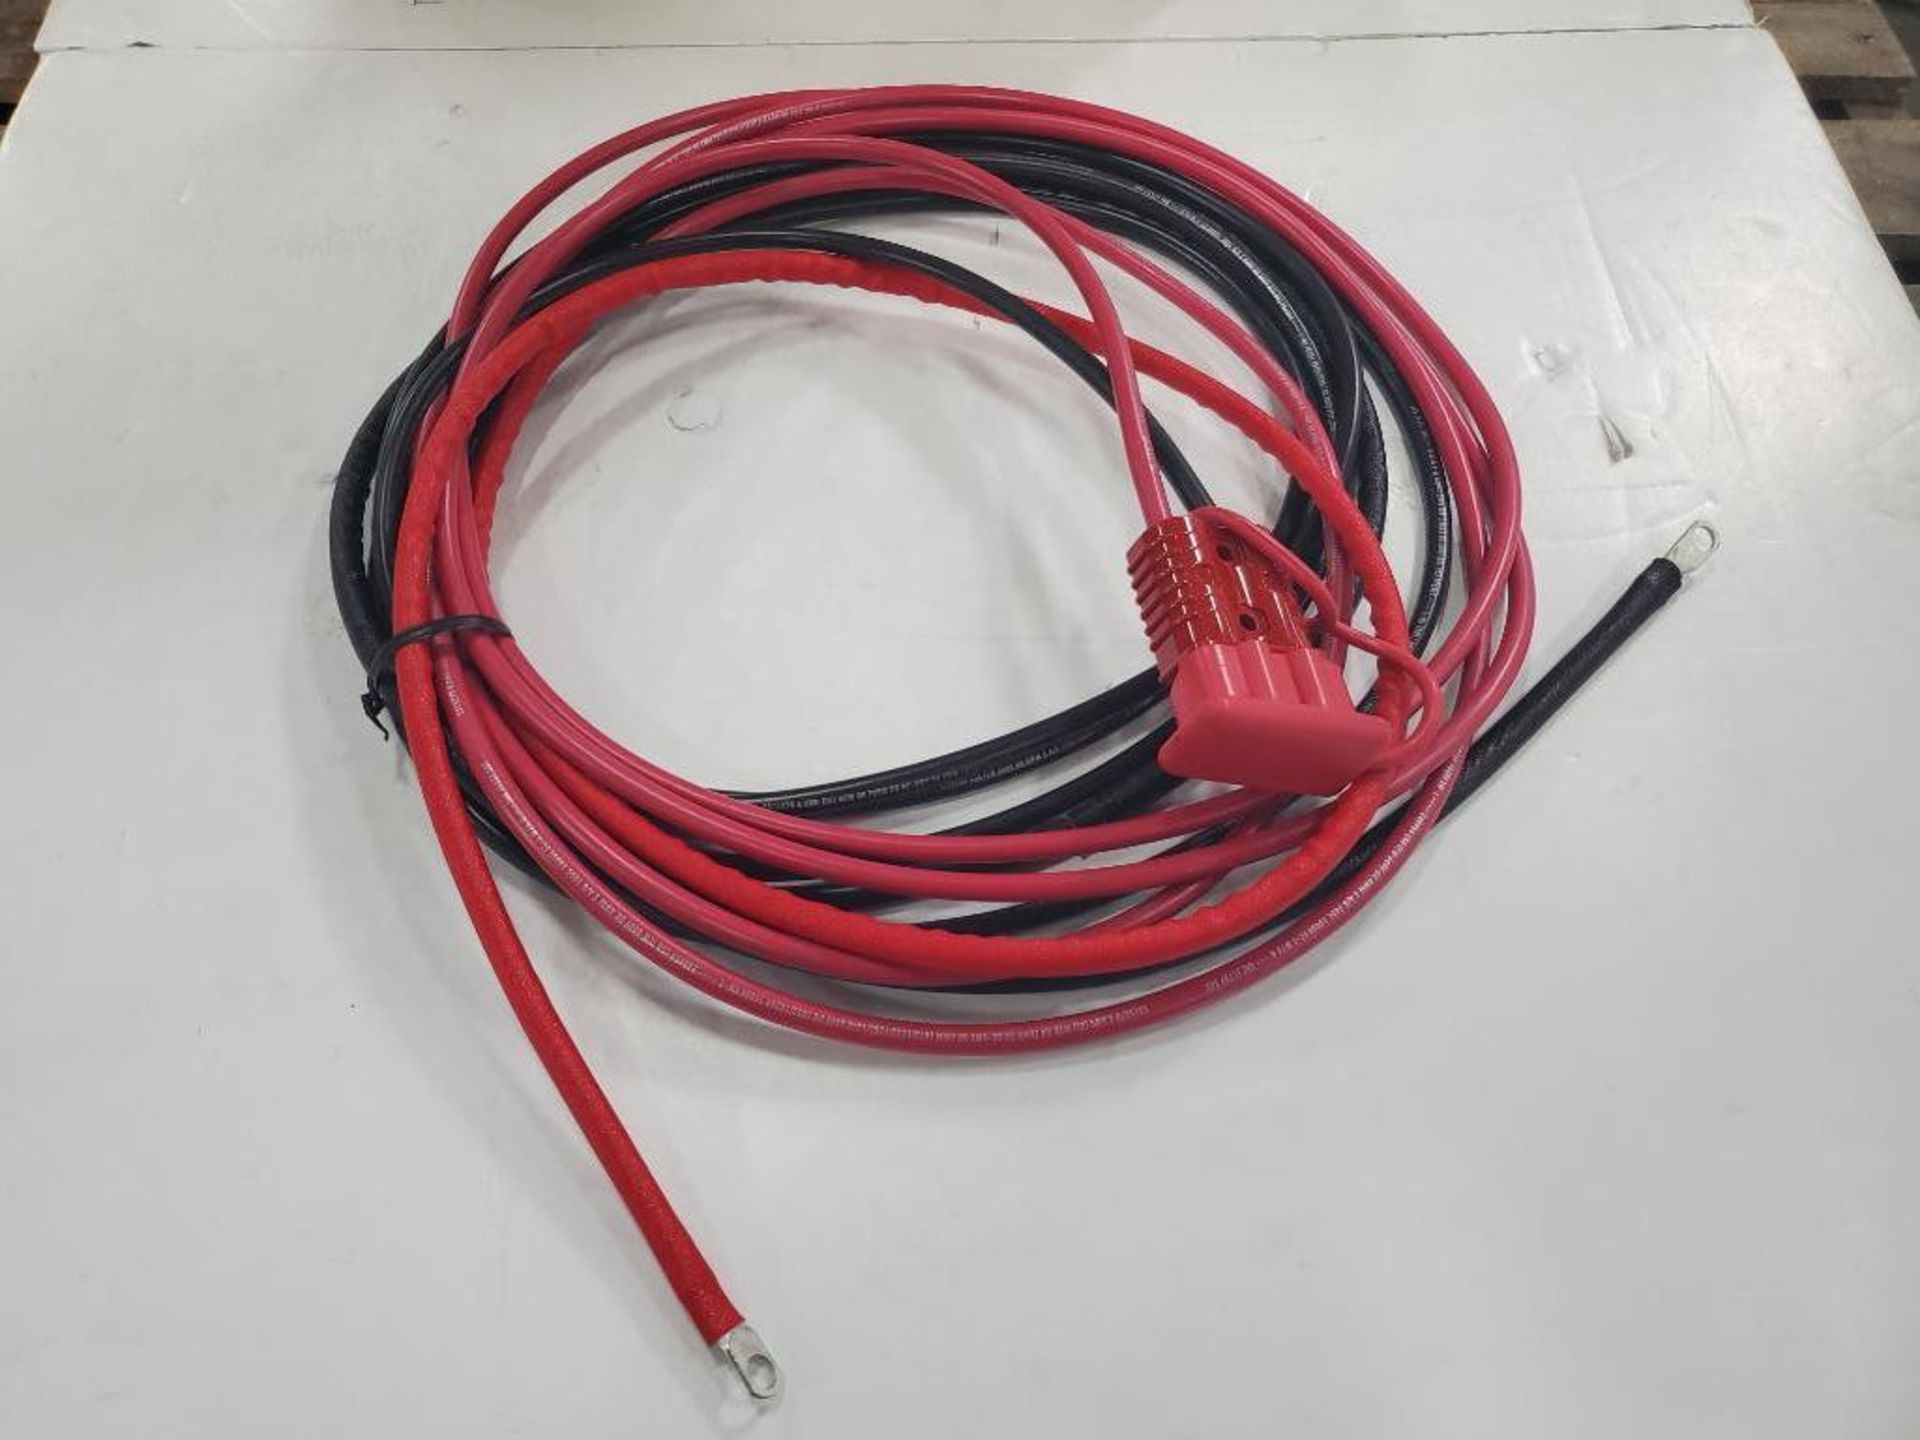 Qty 12 - Anderson 23ft battery adapter cable. RBARA23FT4-G1. 175A, 600V plug. New in box. - Image 7 of 7